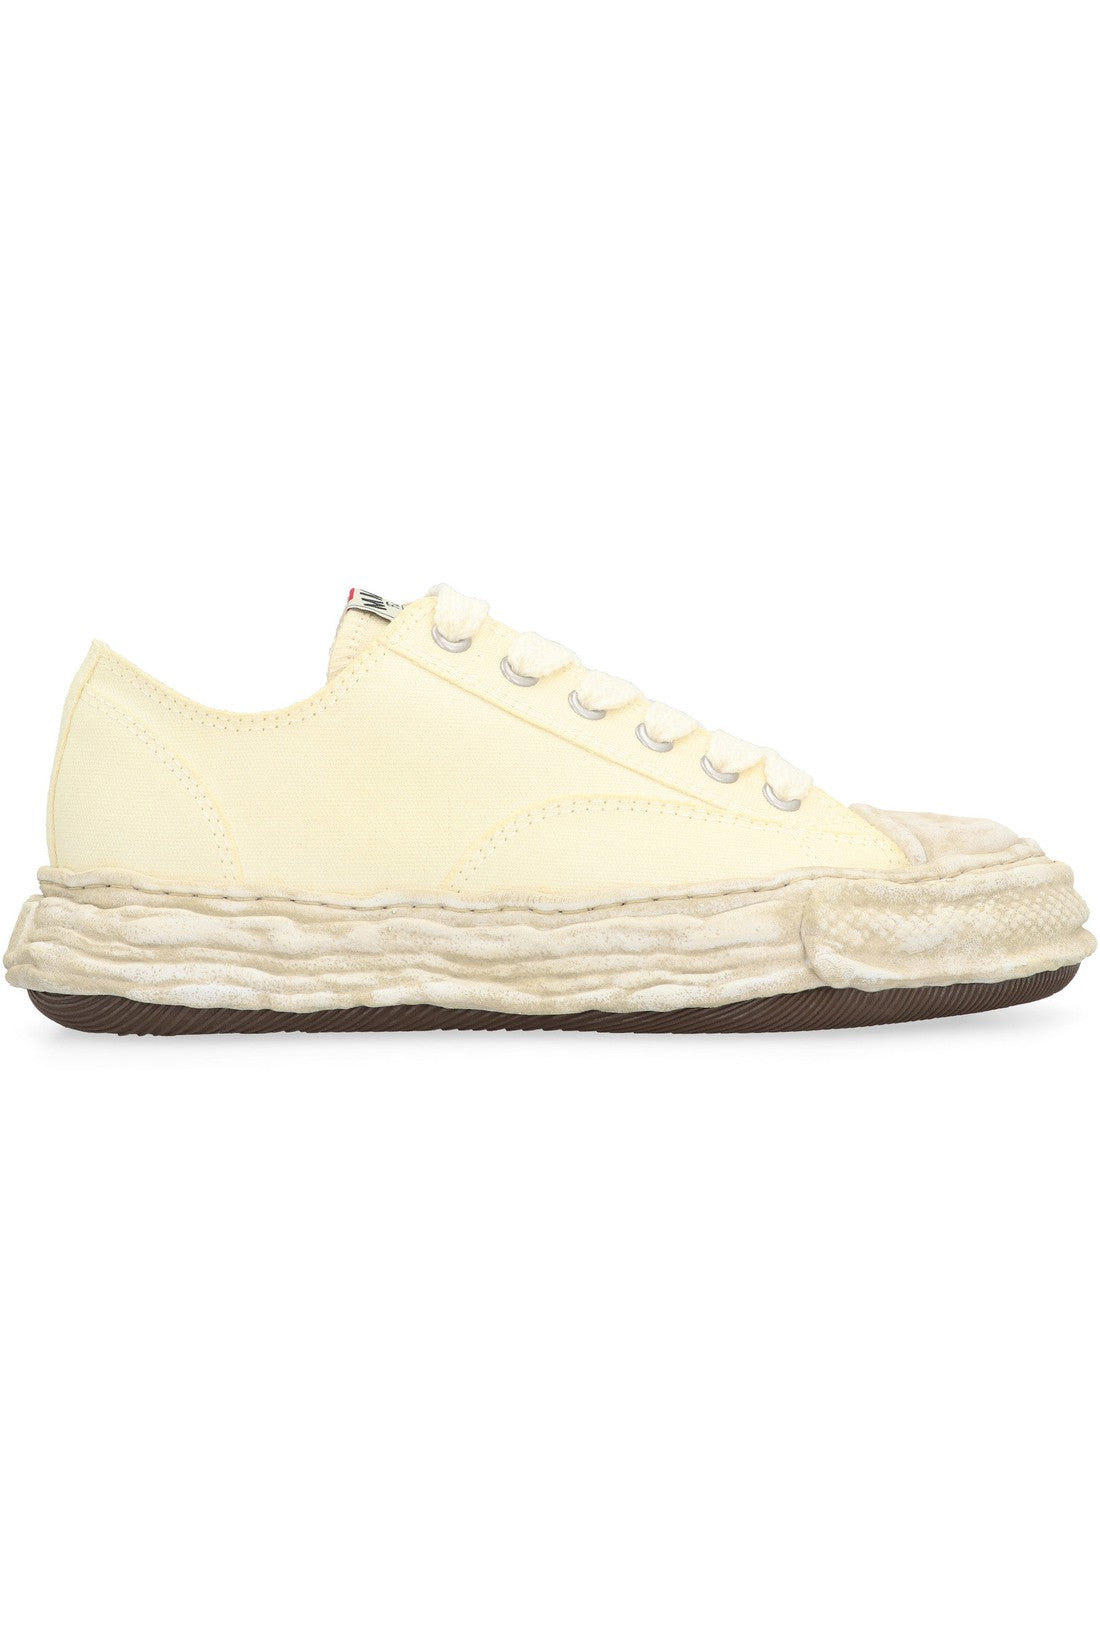 Maison Mihara Yasuhiro-OUTLET-SALE-PETERSON23 fabric low-top sneakers-ARCHIVIST